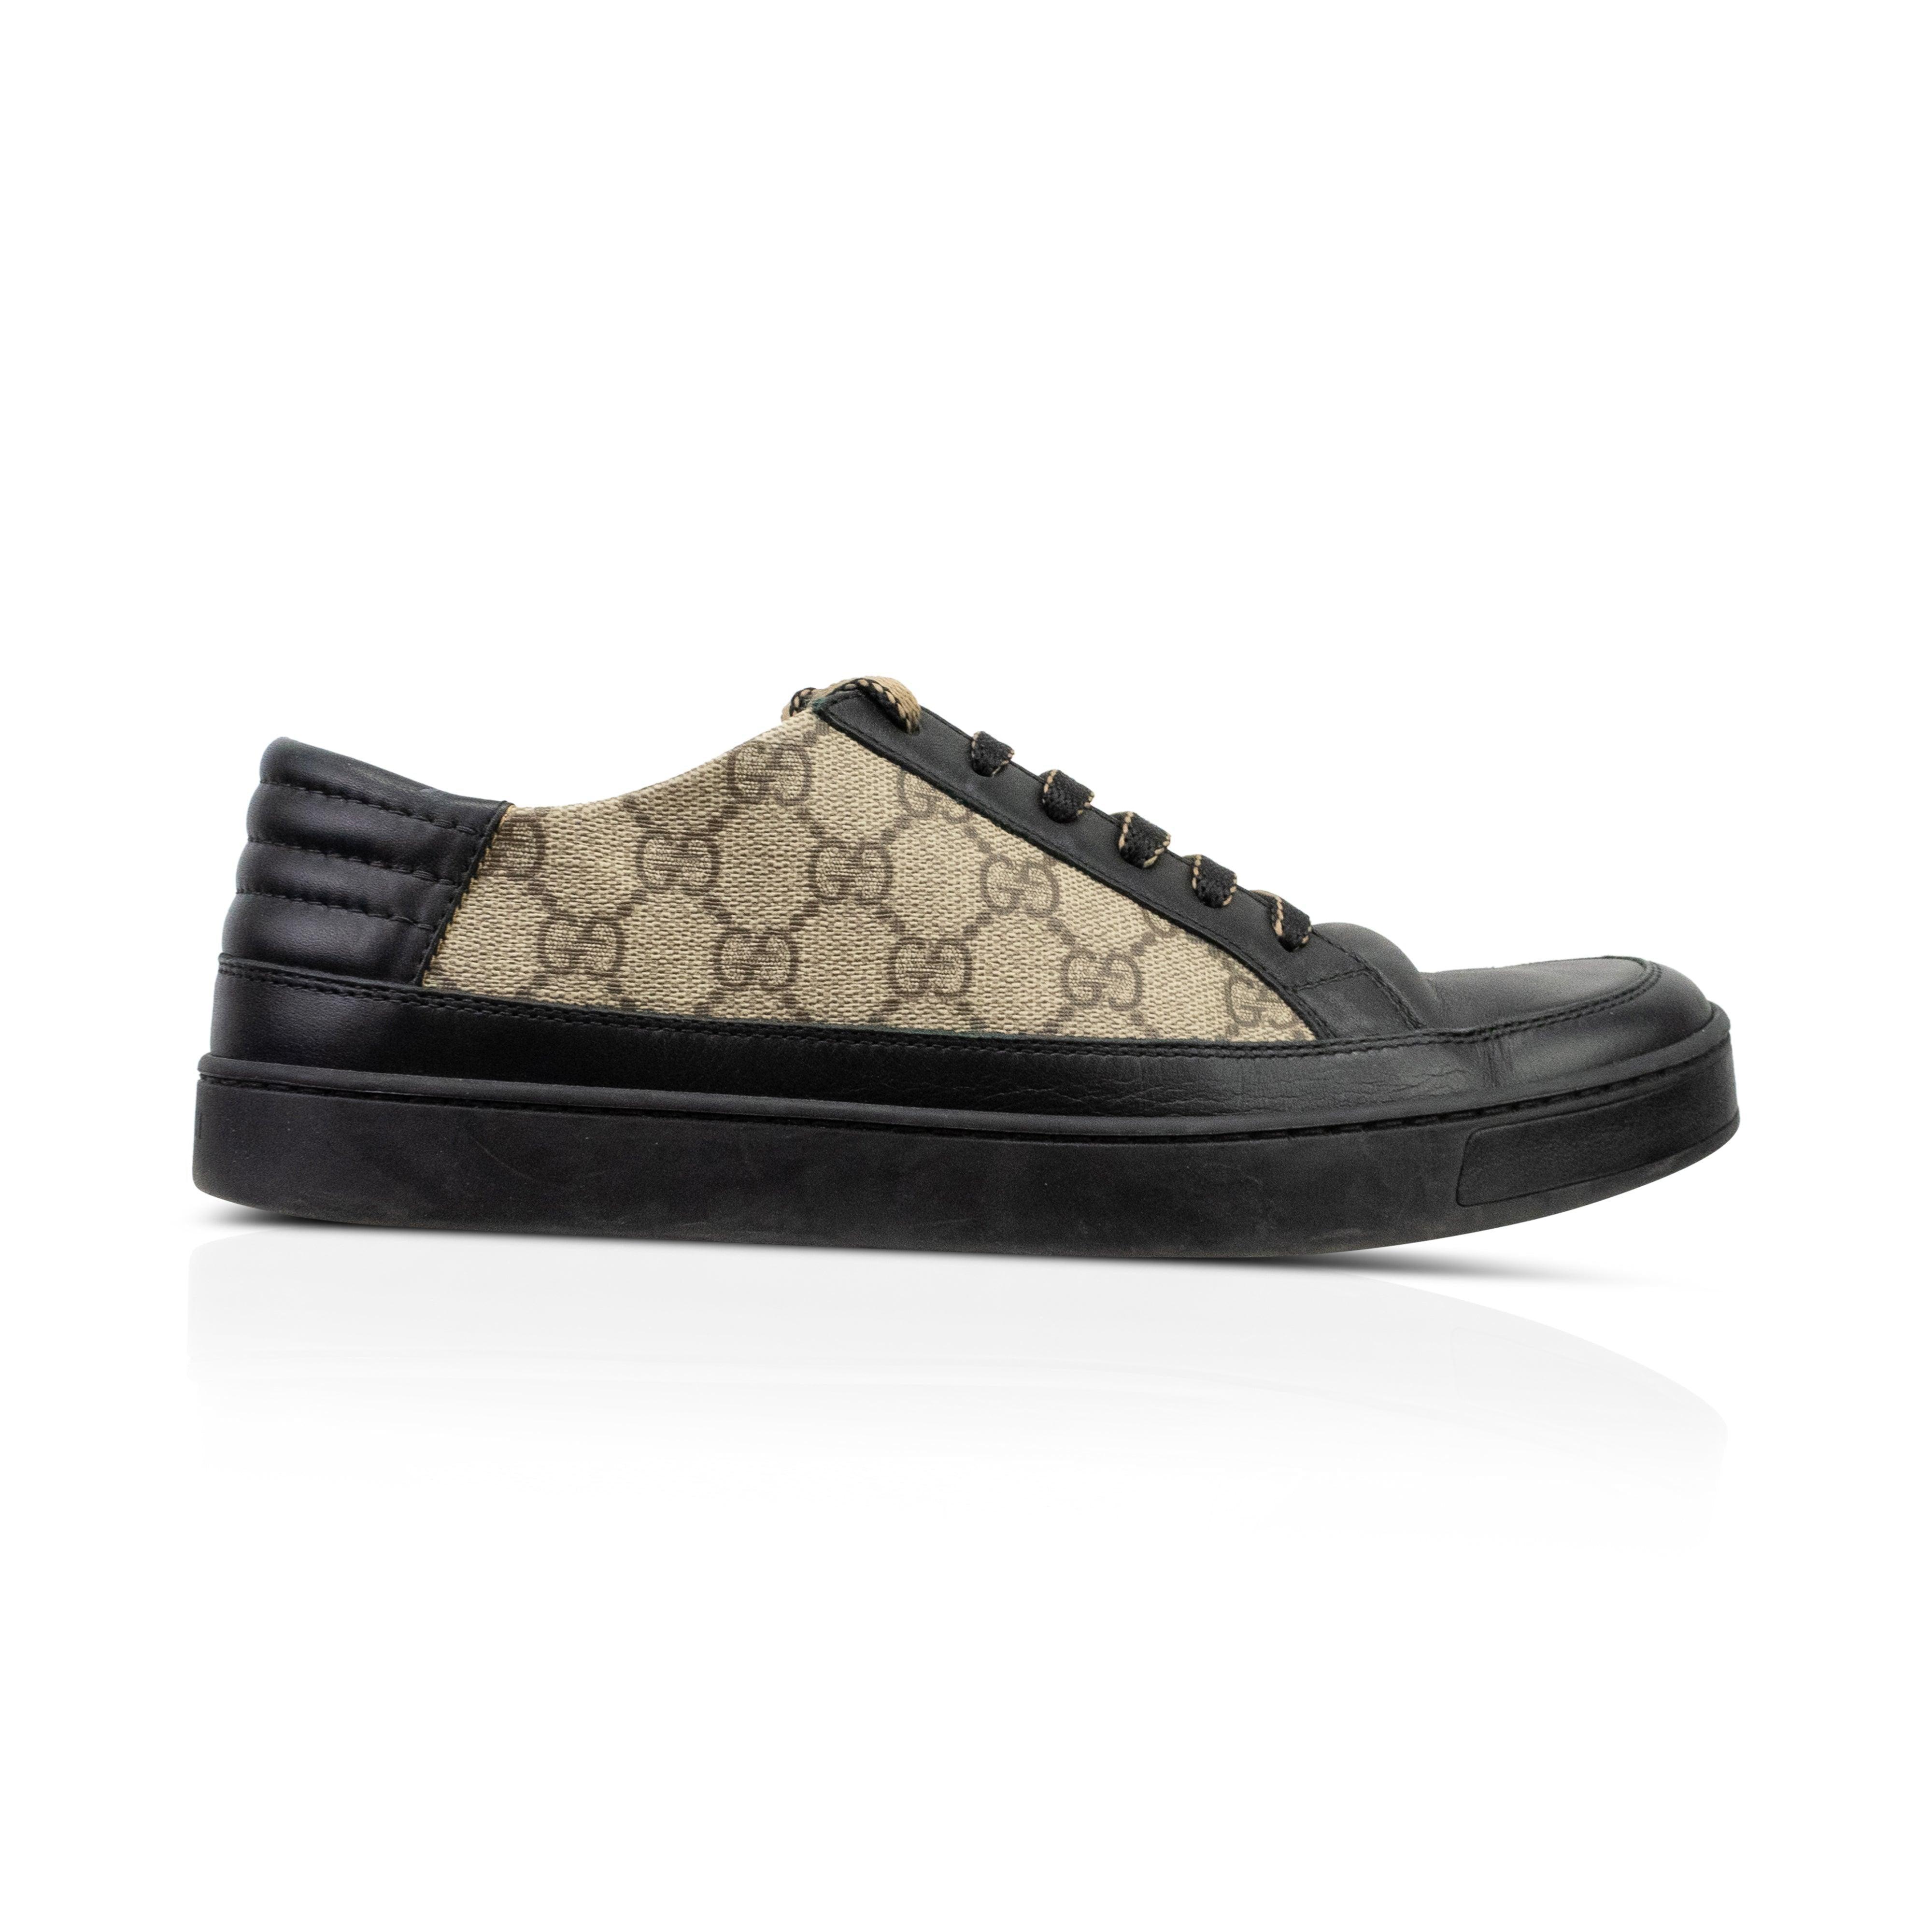 Gucci Sneakers - Men's 7.5 - Fashionably Yours